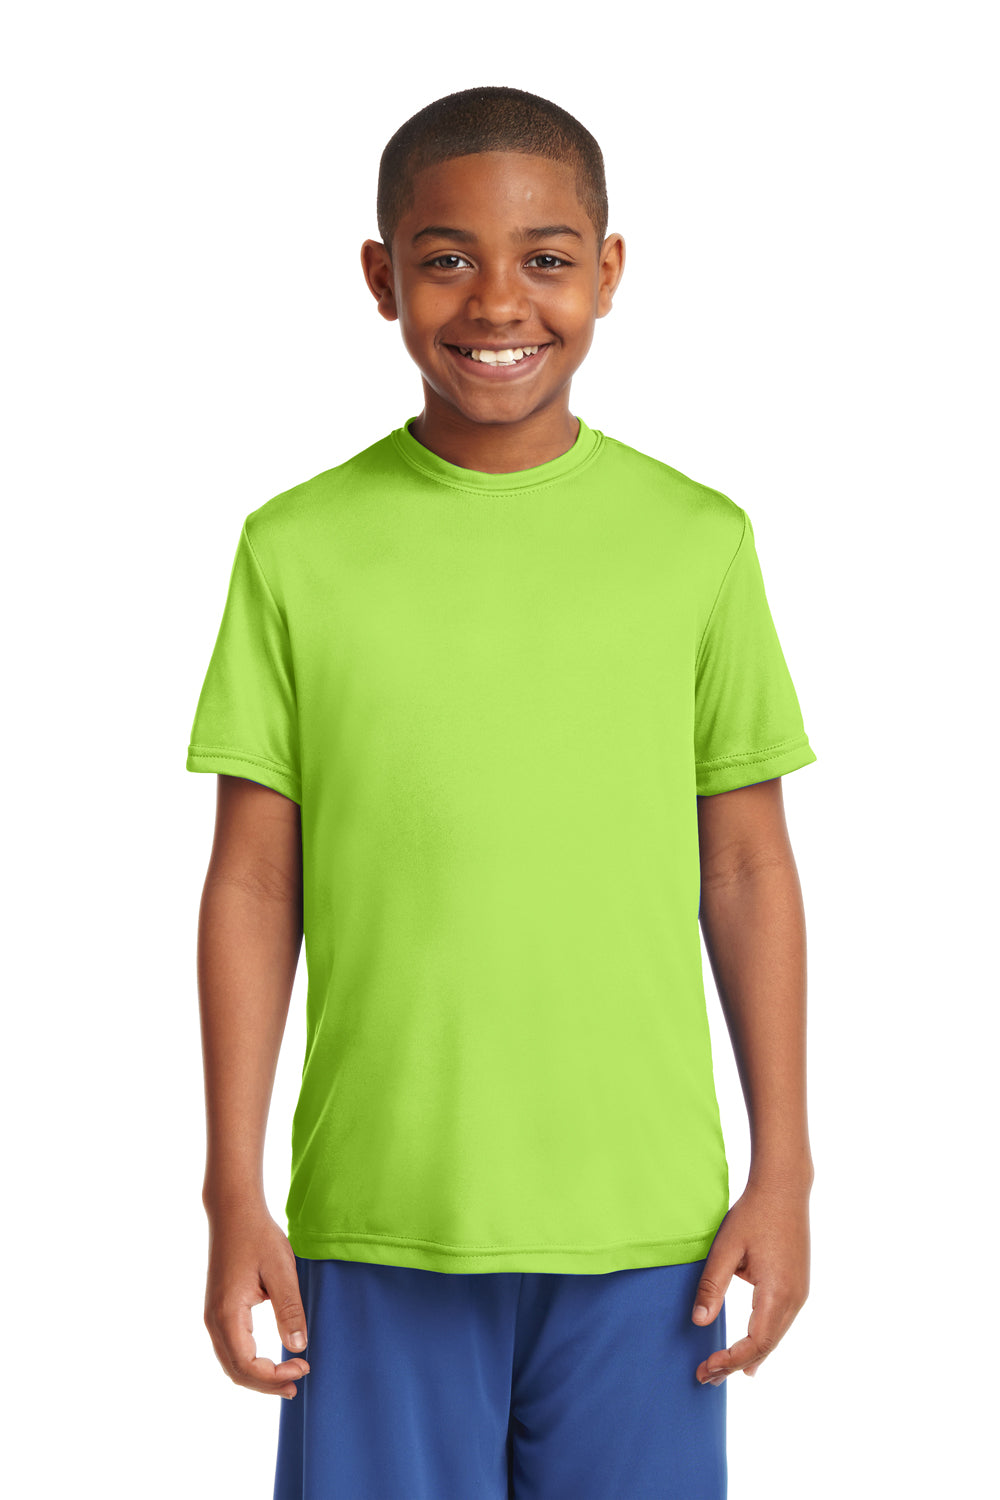 Sport-Tek YST350 Youth Competitor Moisture Wicking Short Sleeve Crewneck T-Shirt Lime Green Front